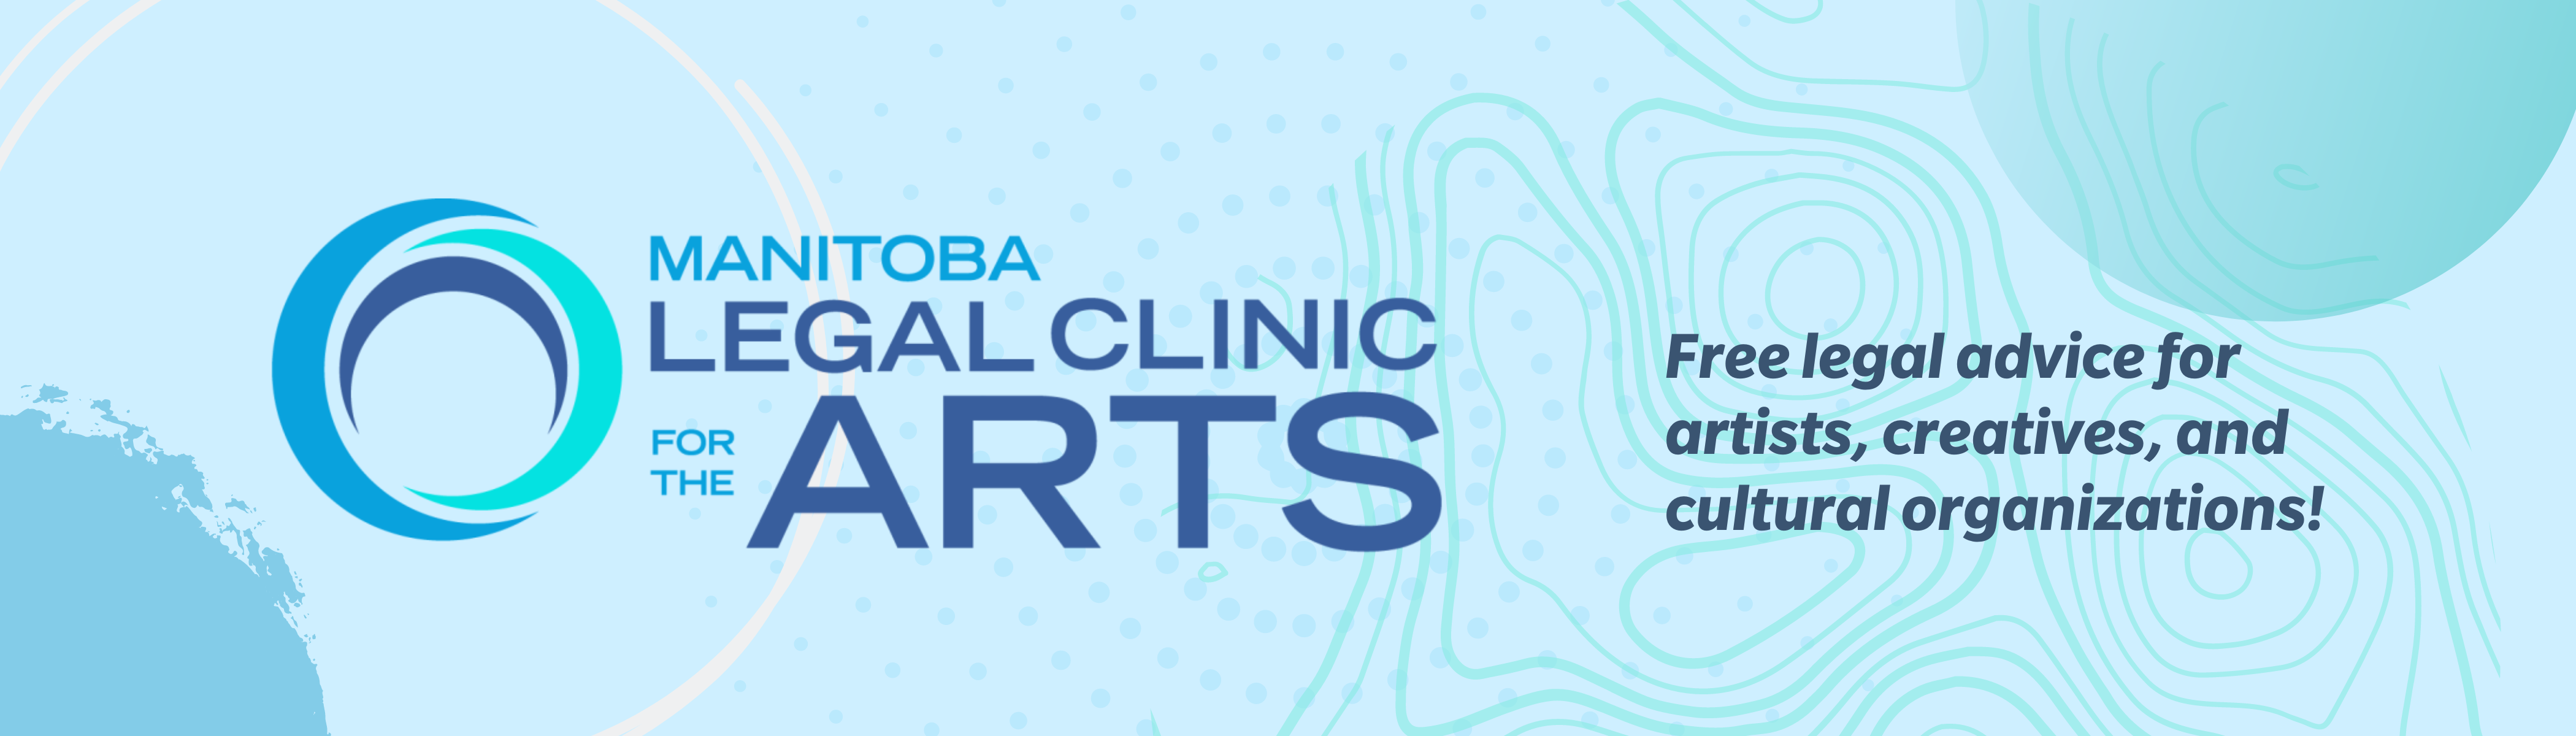 MB Legal Clinic for the Arts